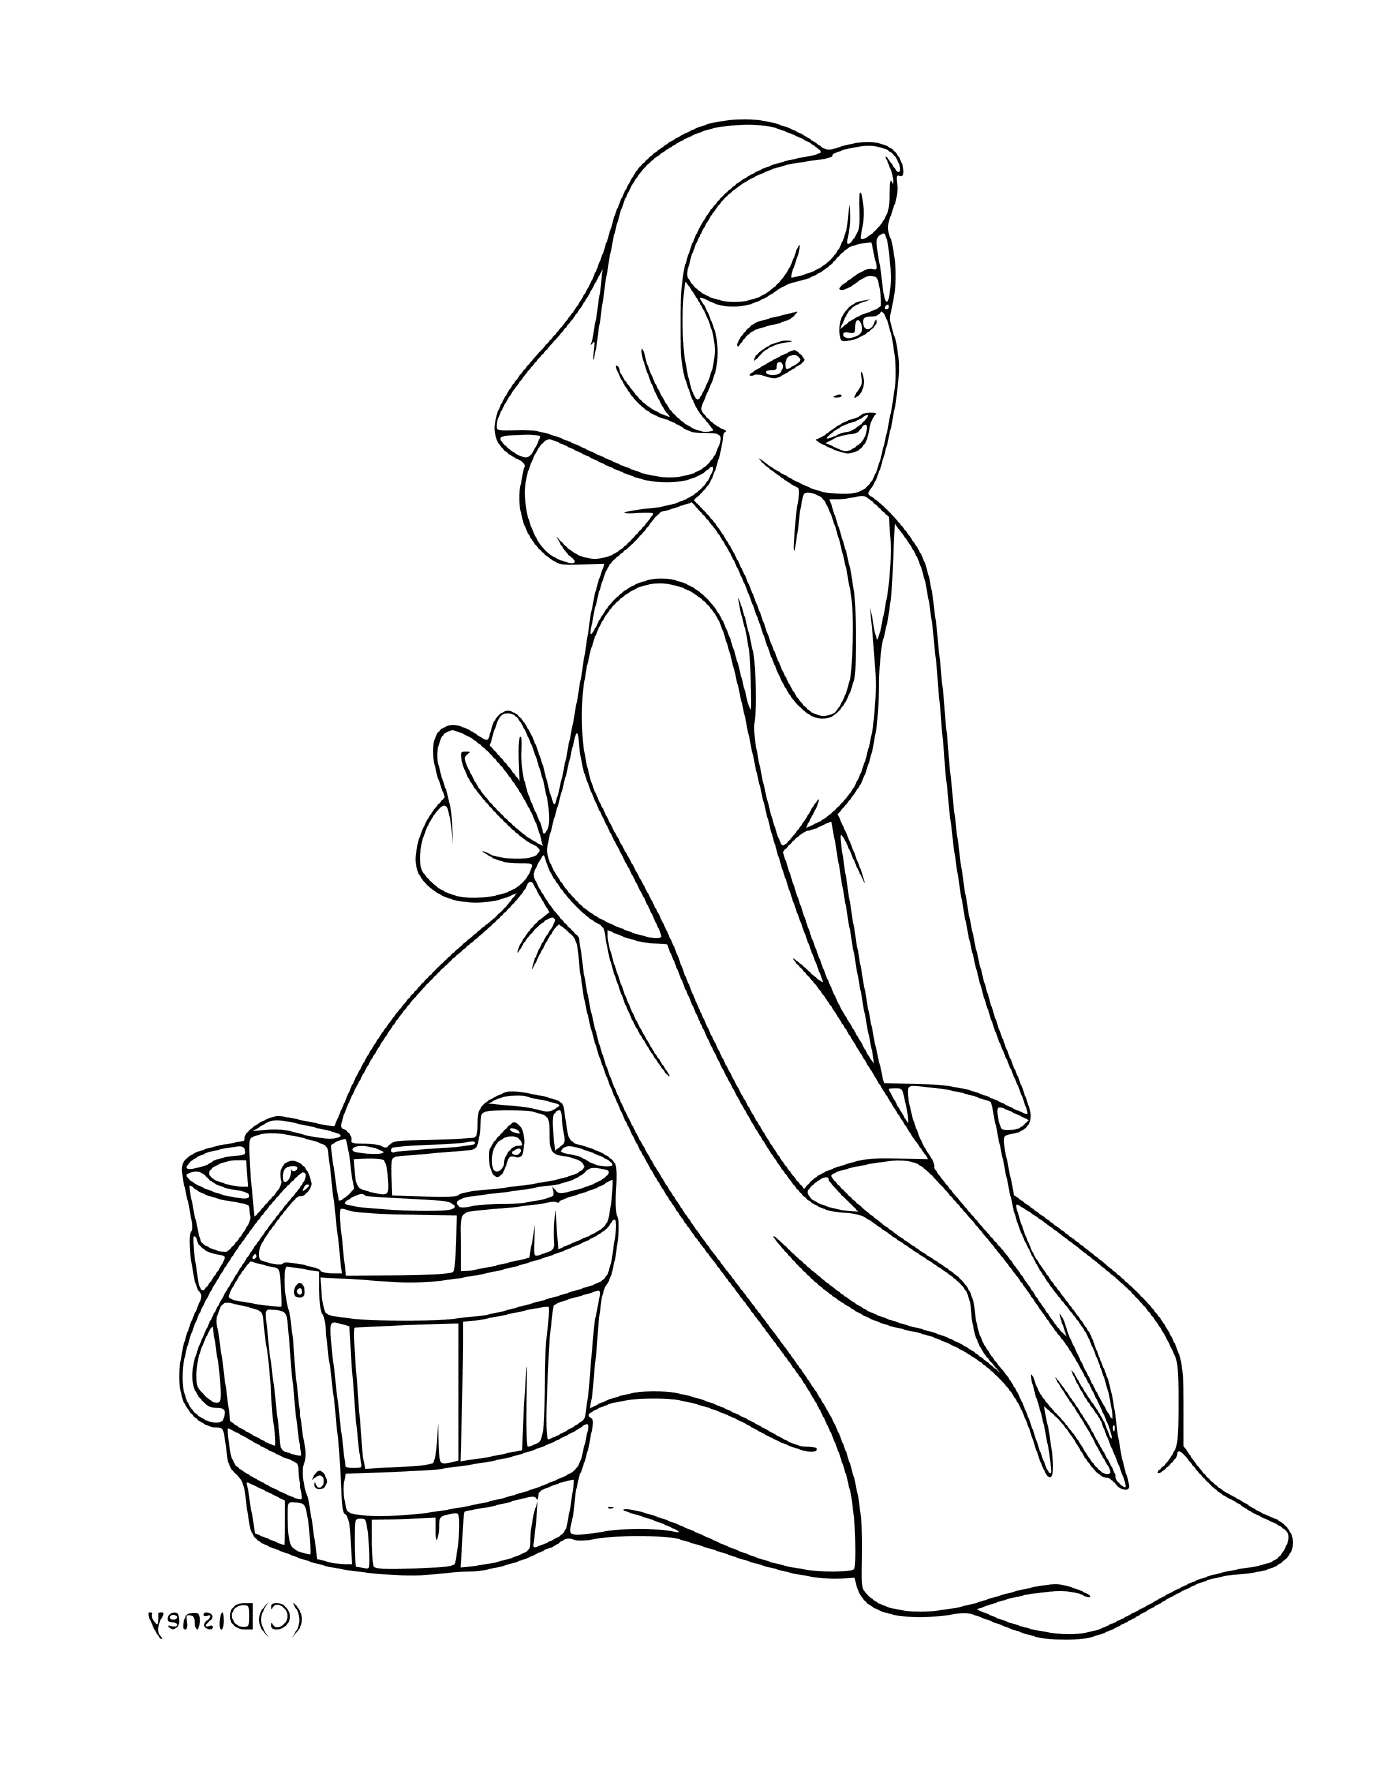  Cinderella performing household chores with a bucket 